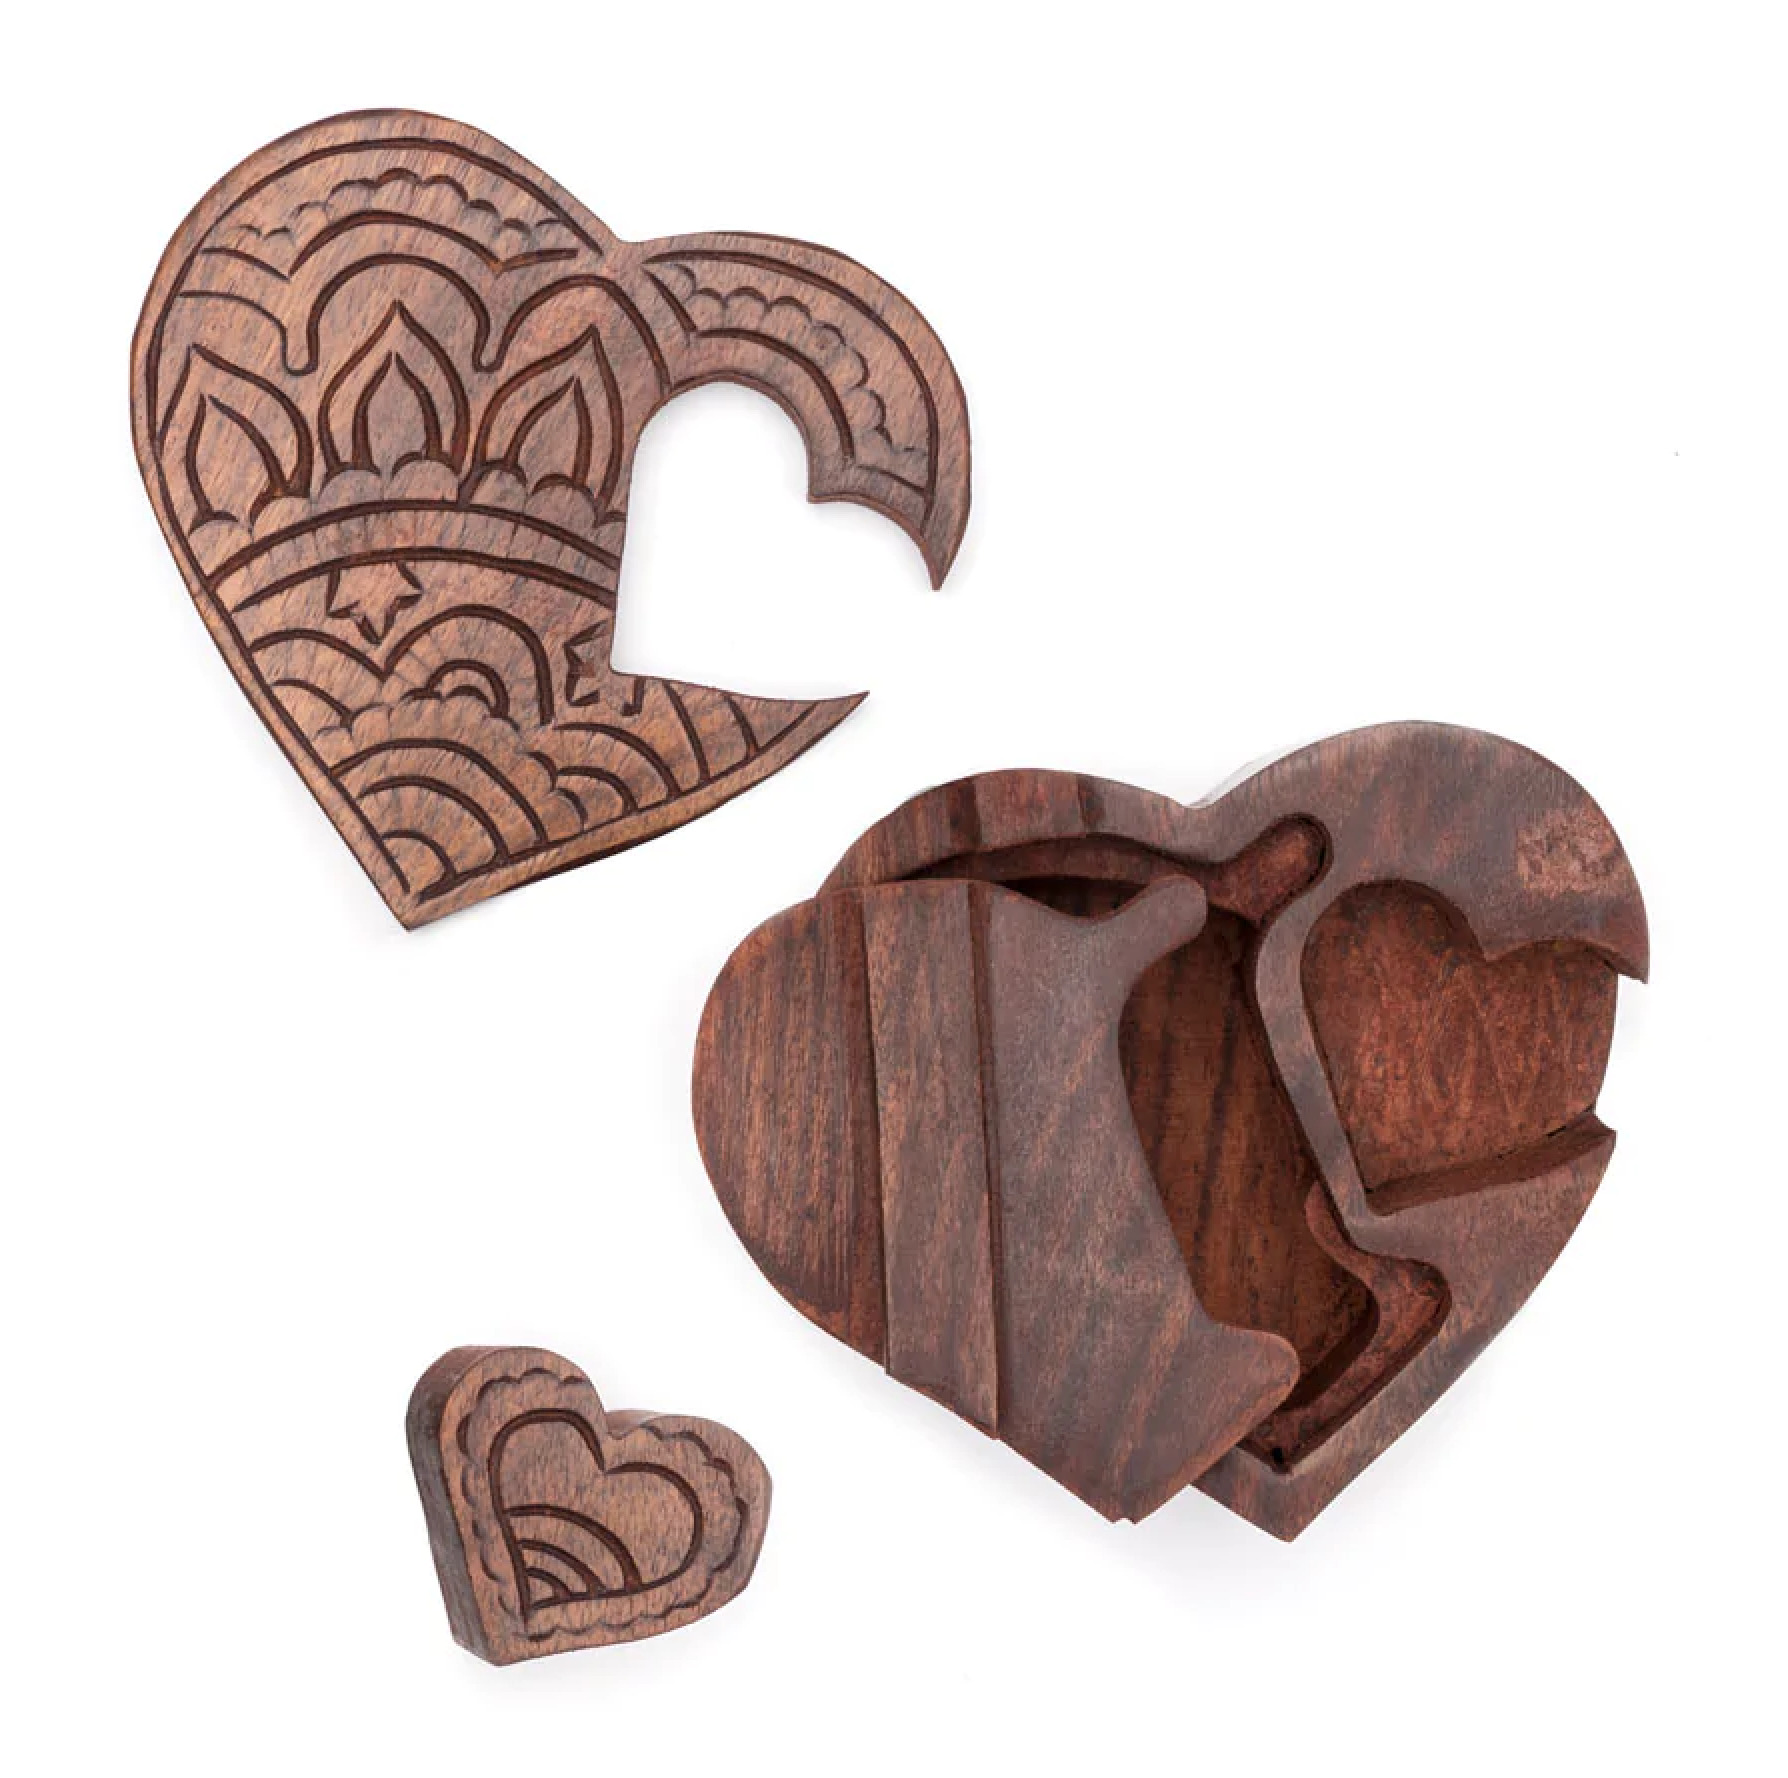 Wooden heart puzzle